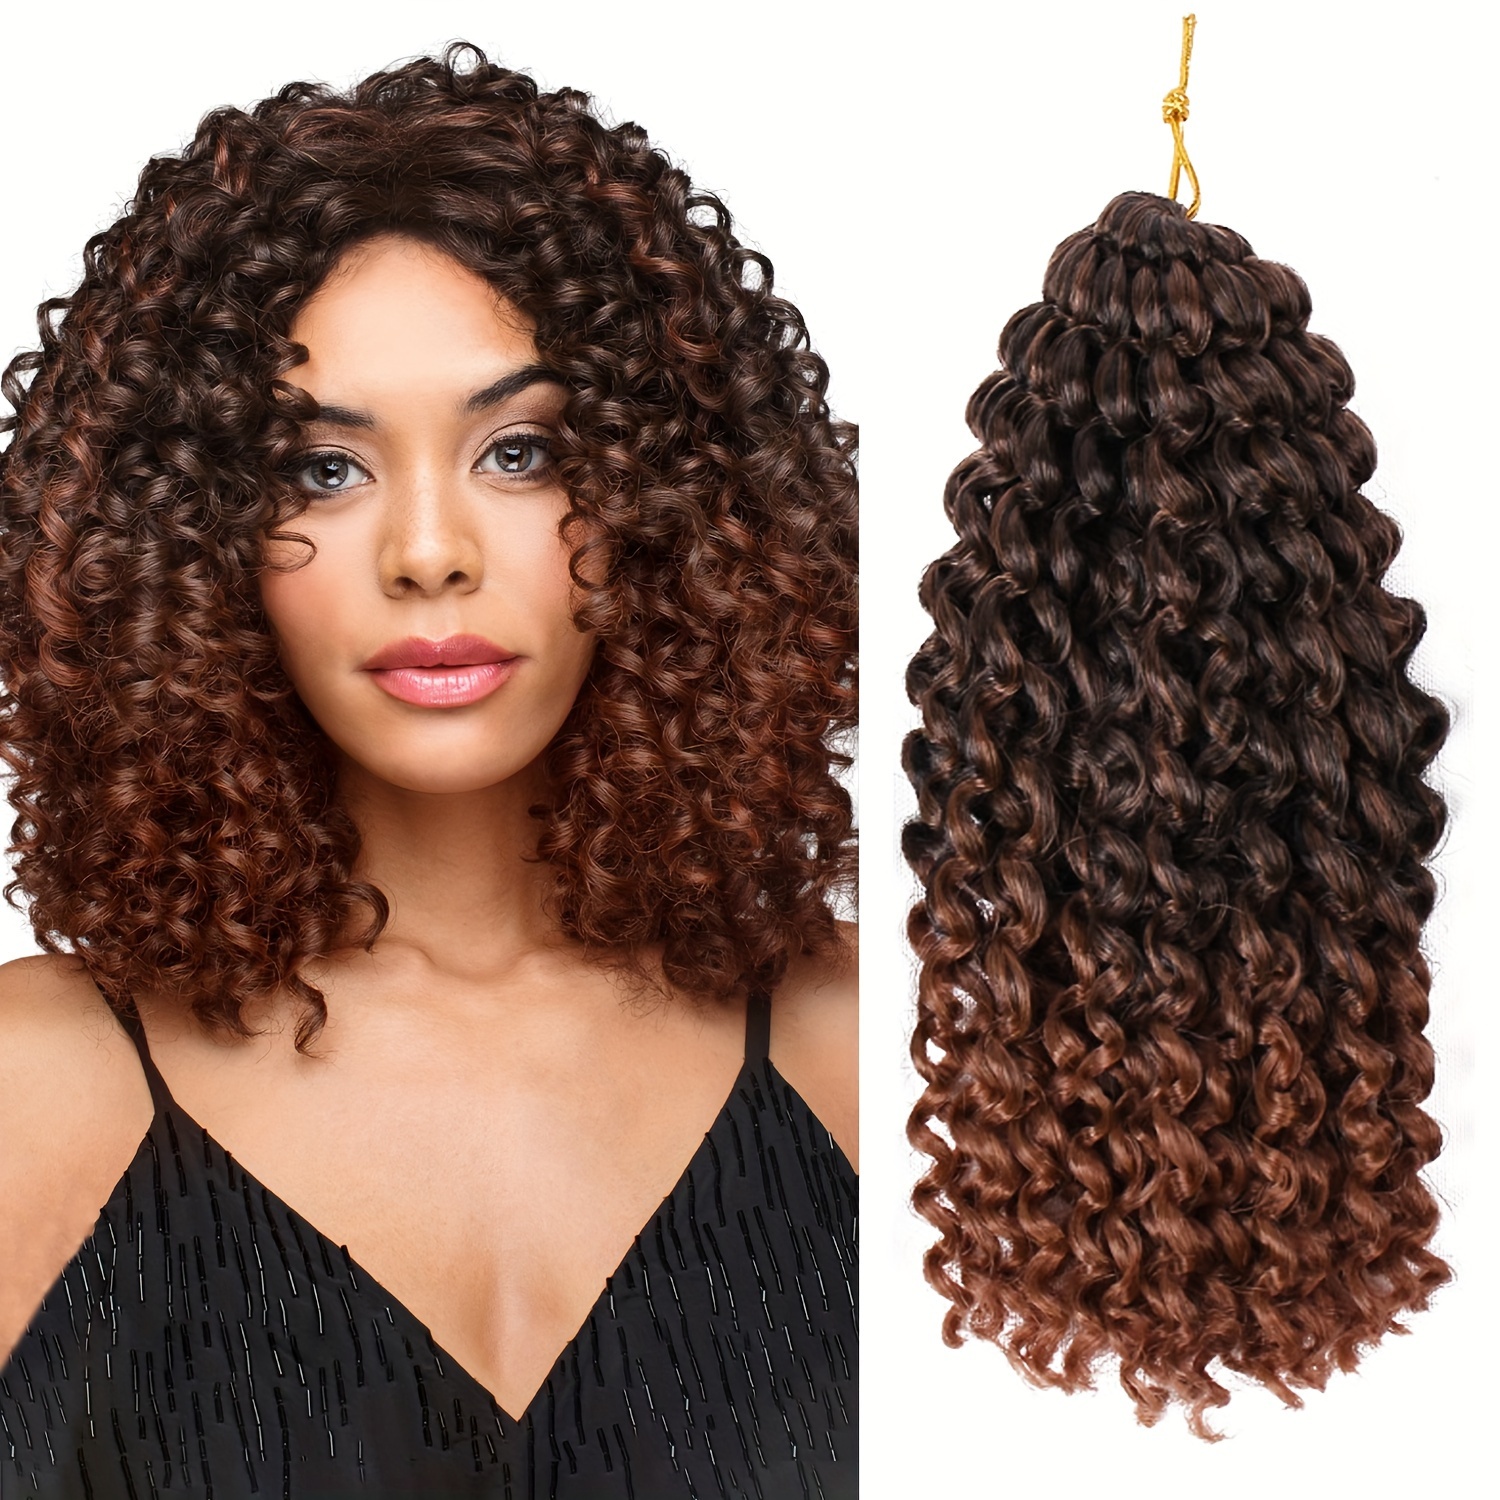 Passion Twist 8 Inch Marlybob Crochet Curly Hair Extensions 3